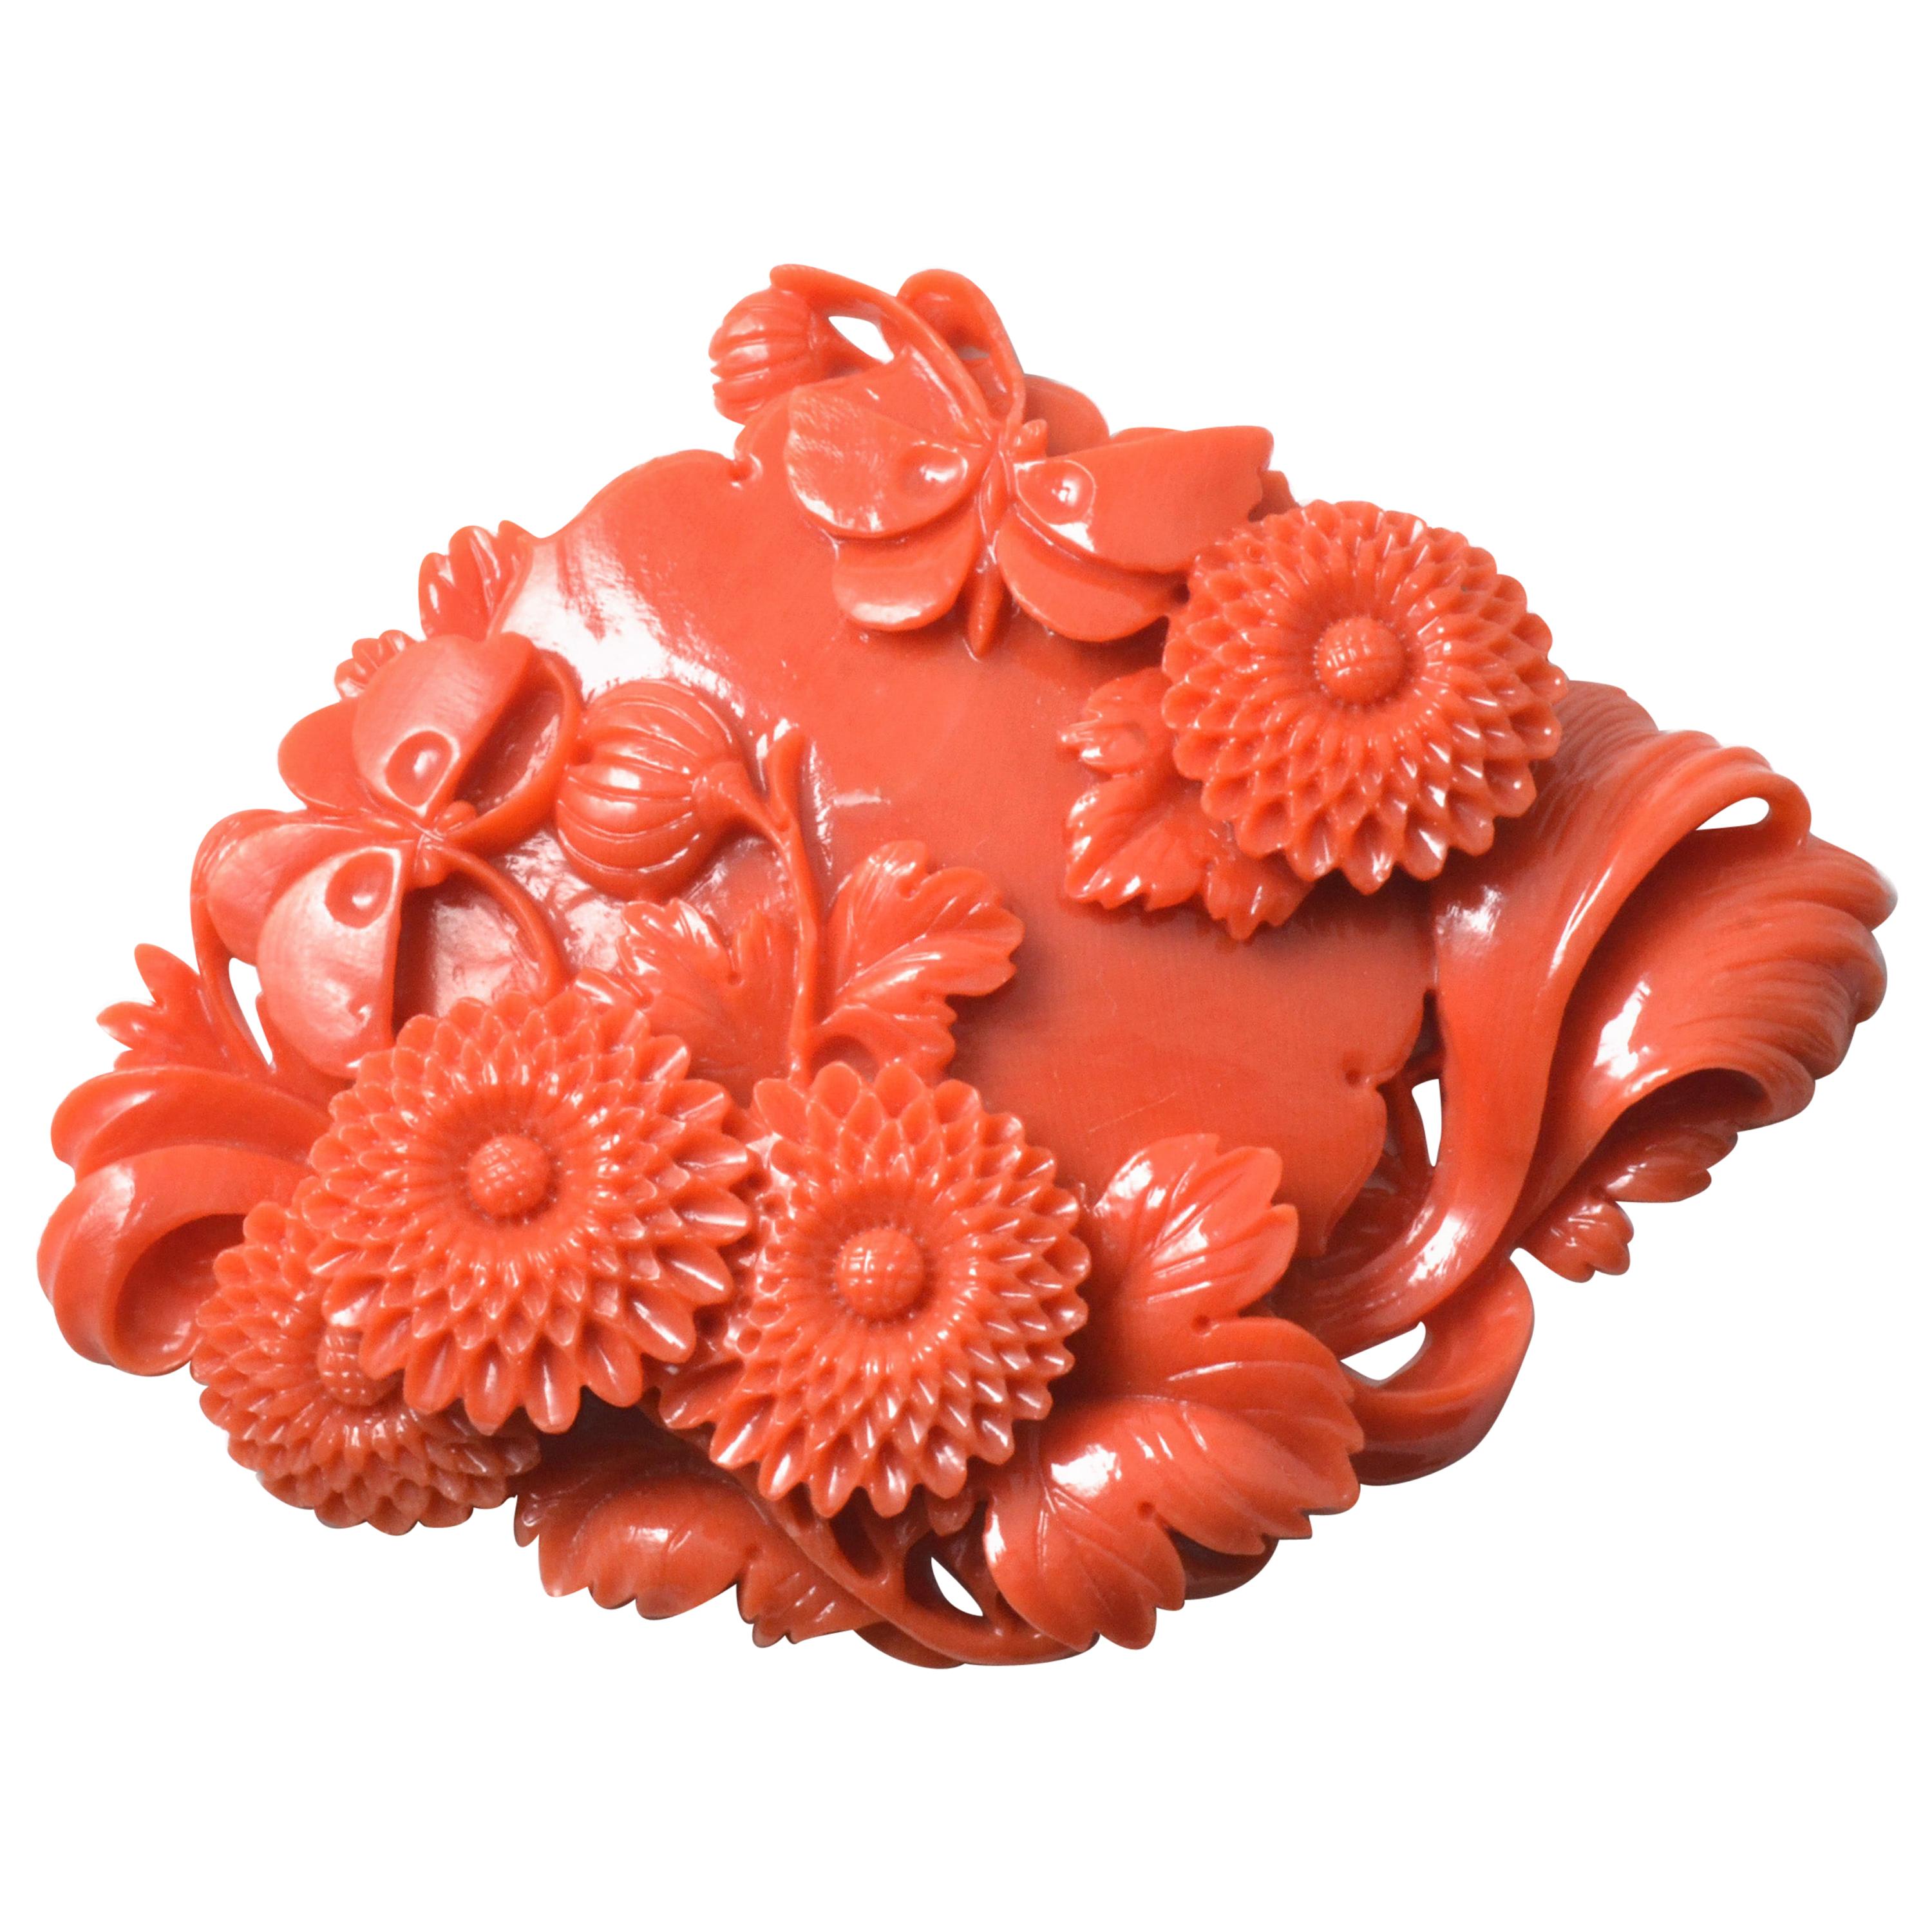 Vintage Japanese Momoiro Sango Carved Coral Plate Butterflies and Chrysanthemum For Sale